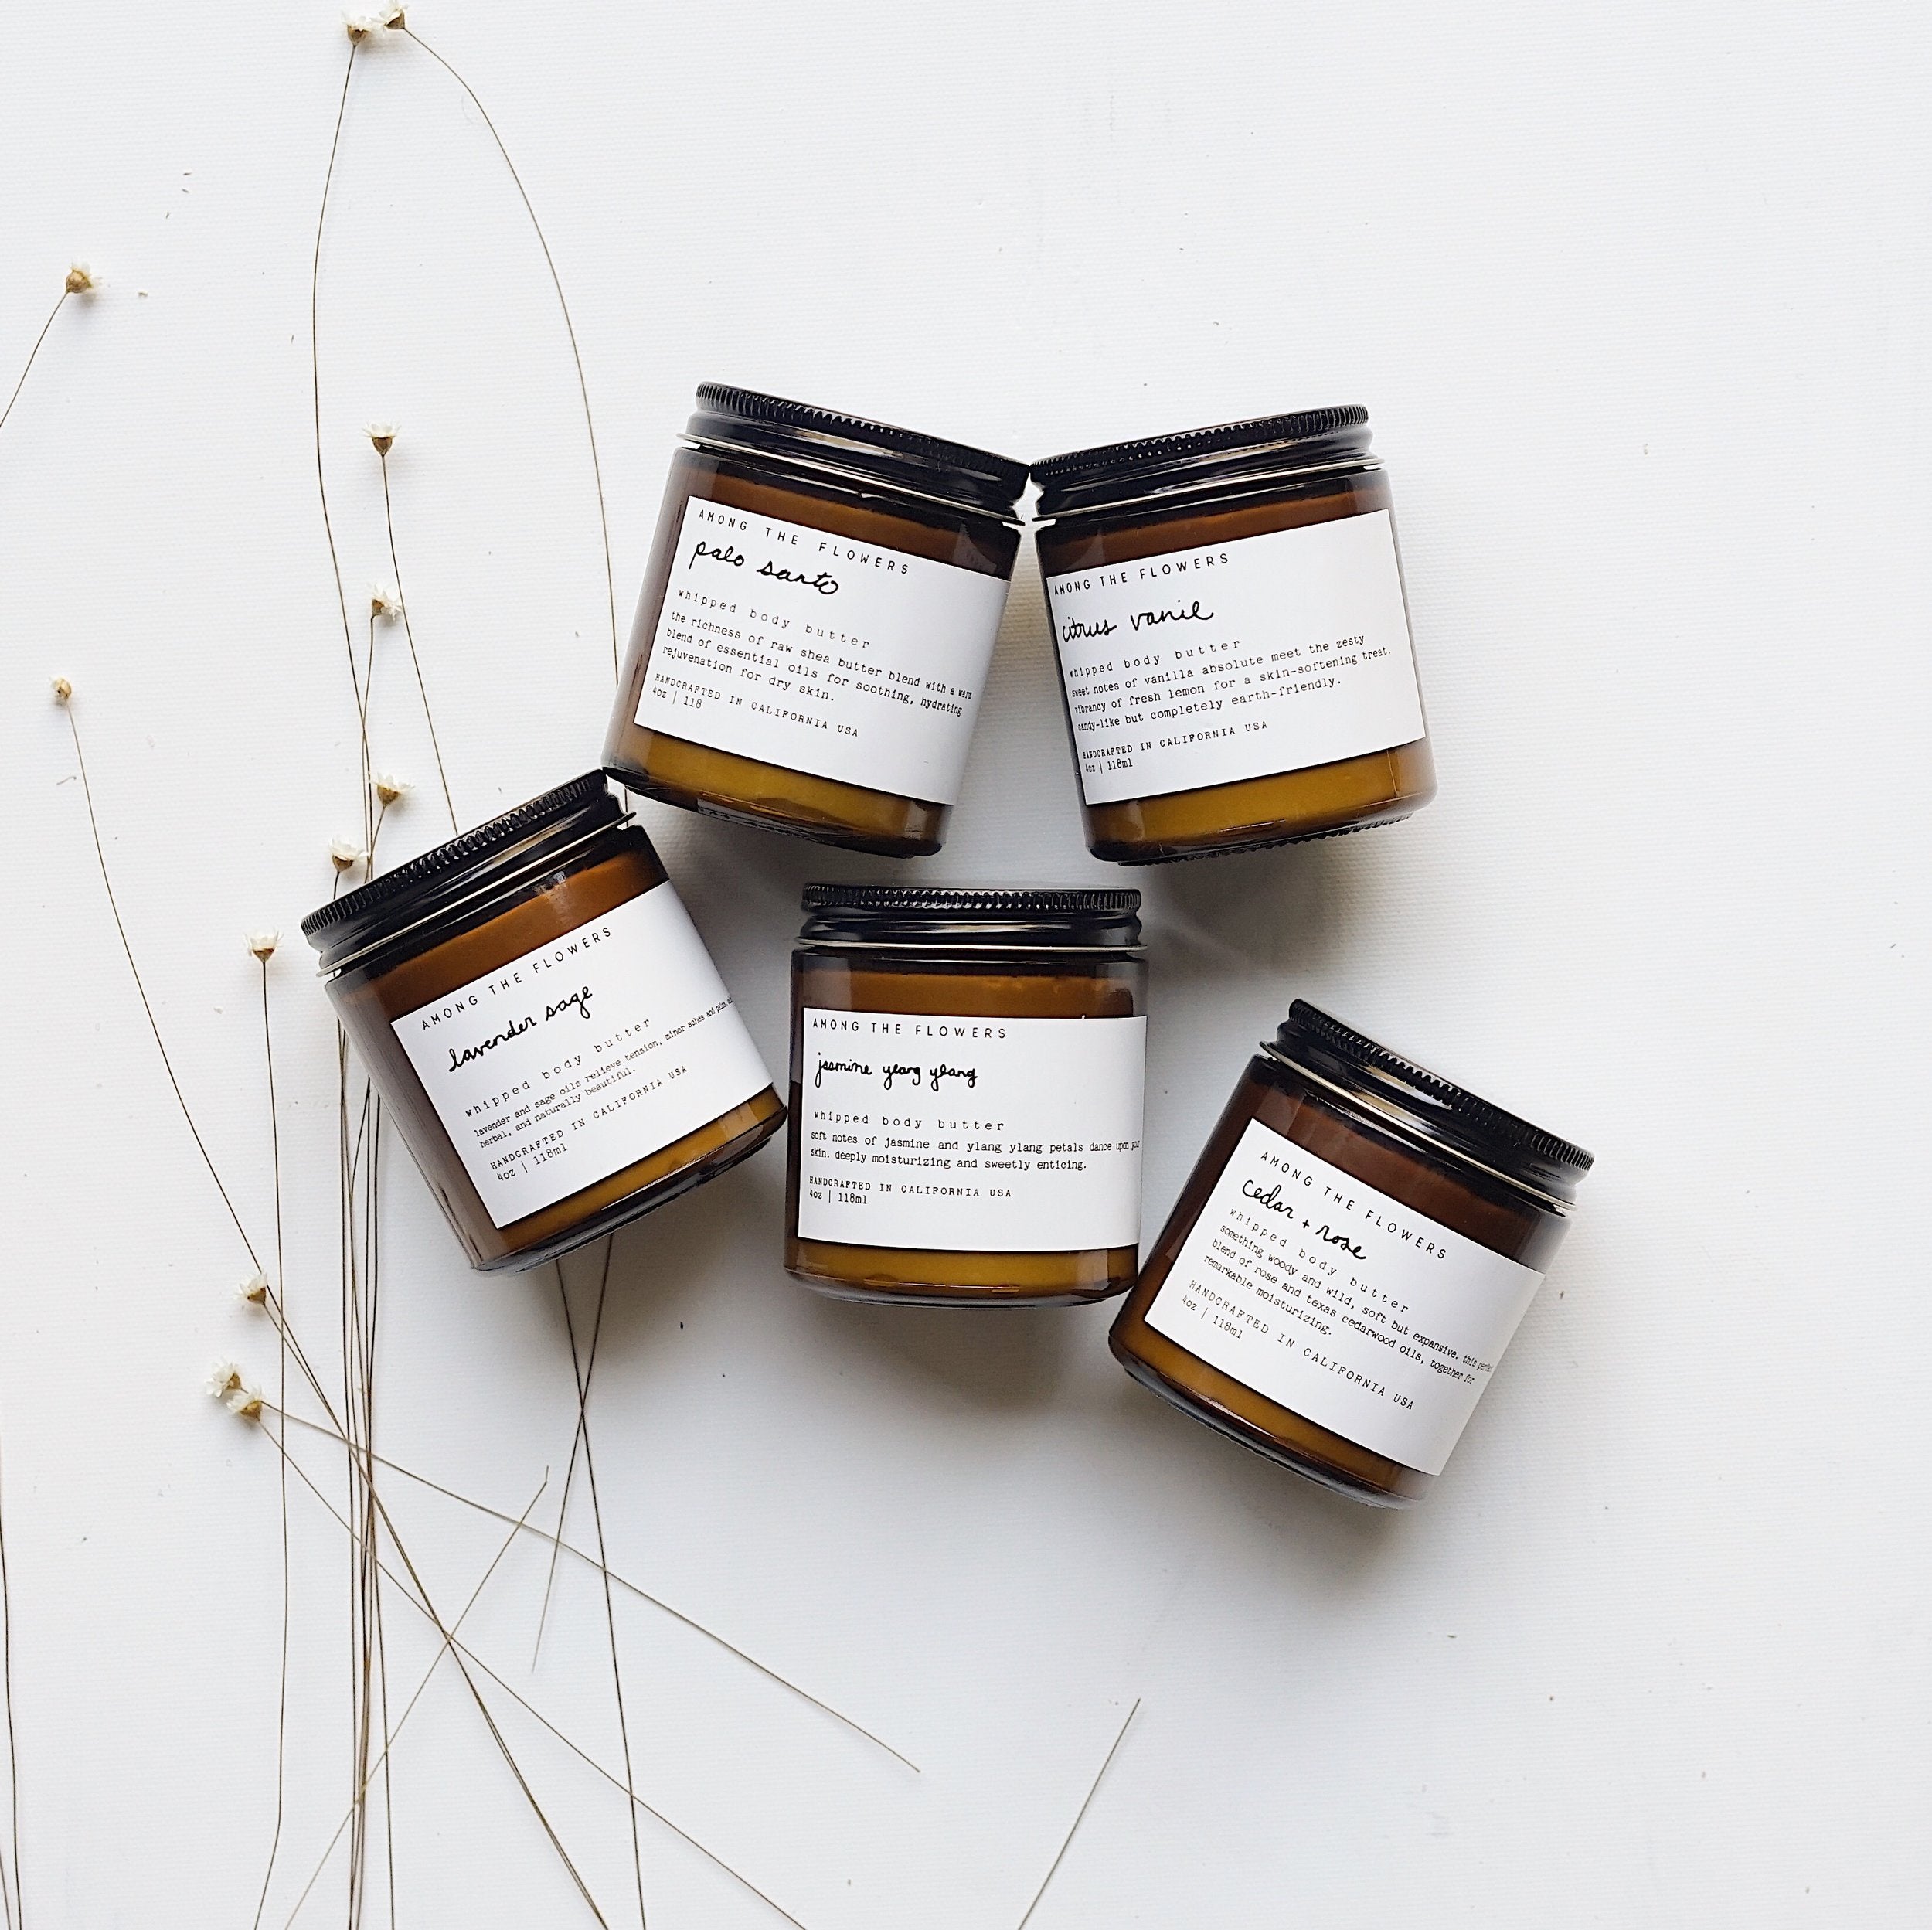 Milk + Honey Body Butter by Among the Flowers